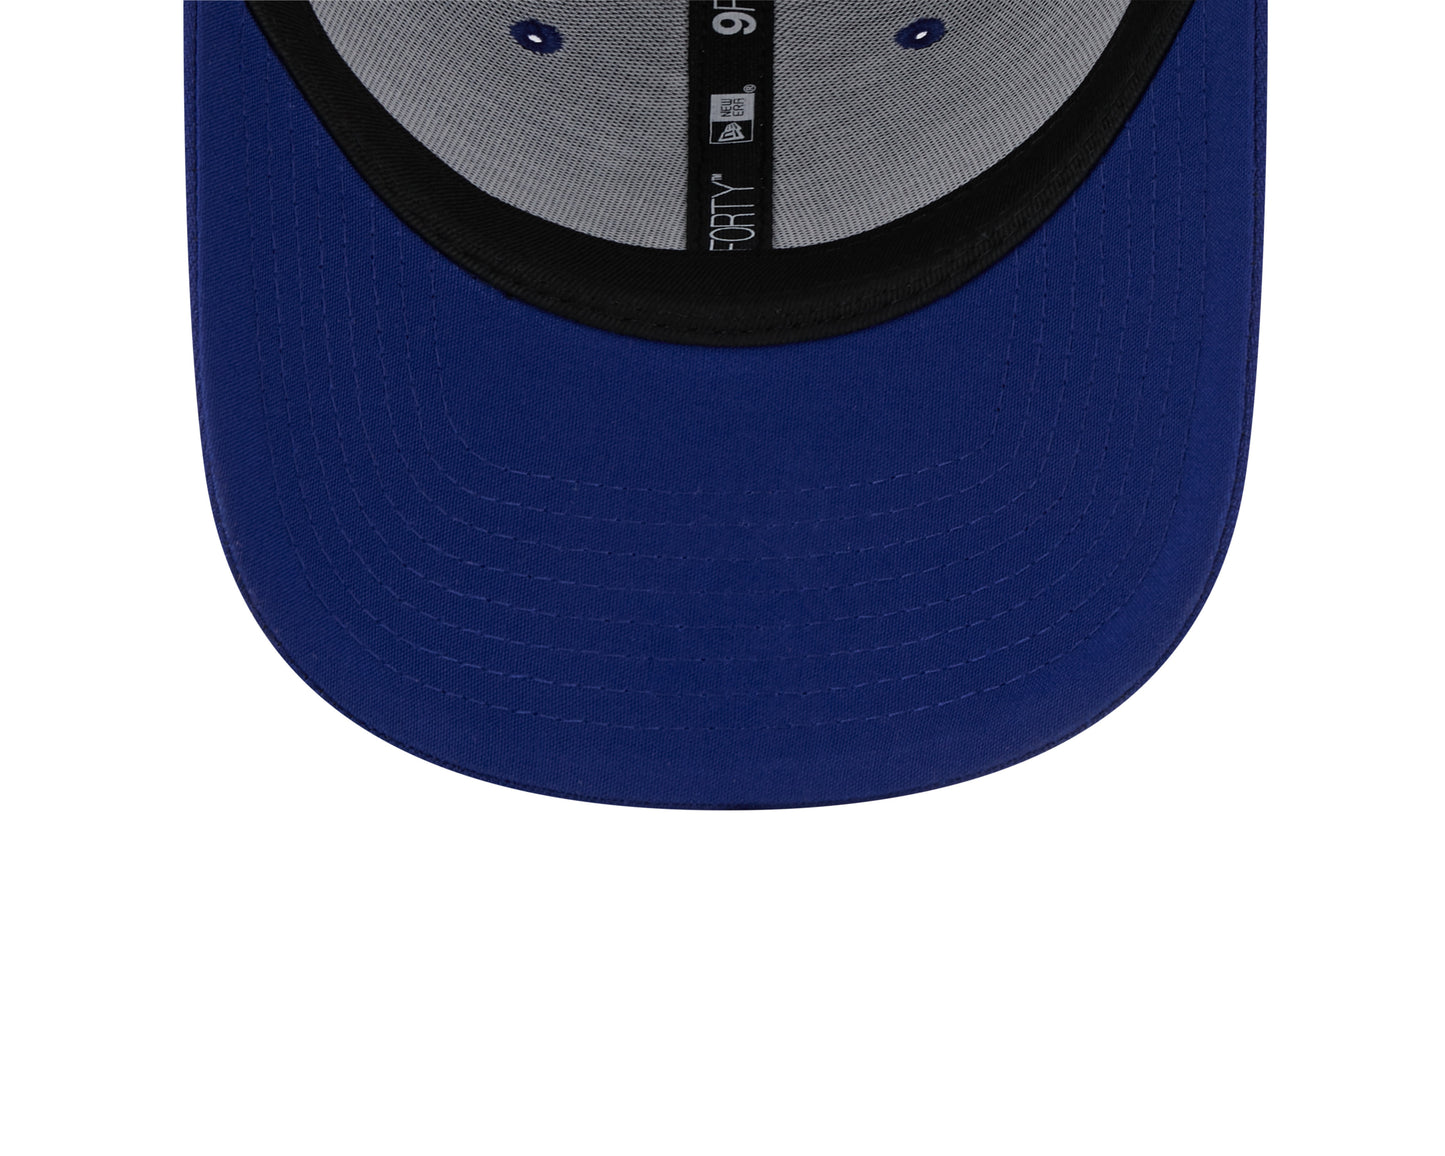 Chicago Cubs New Era 1914 Cooperstown Collection The League Blue 9FORTY Adjustable Hat